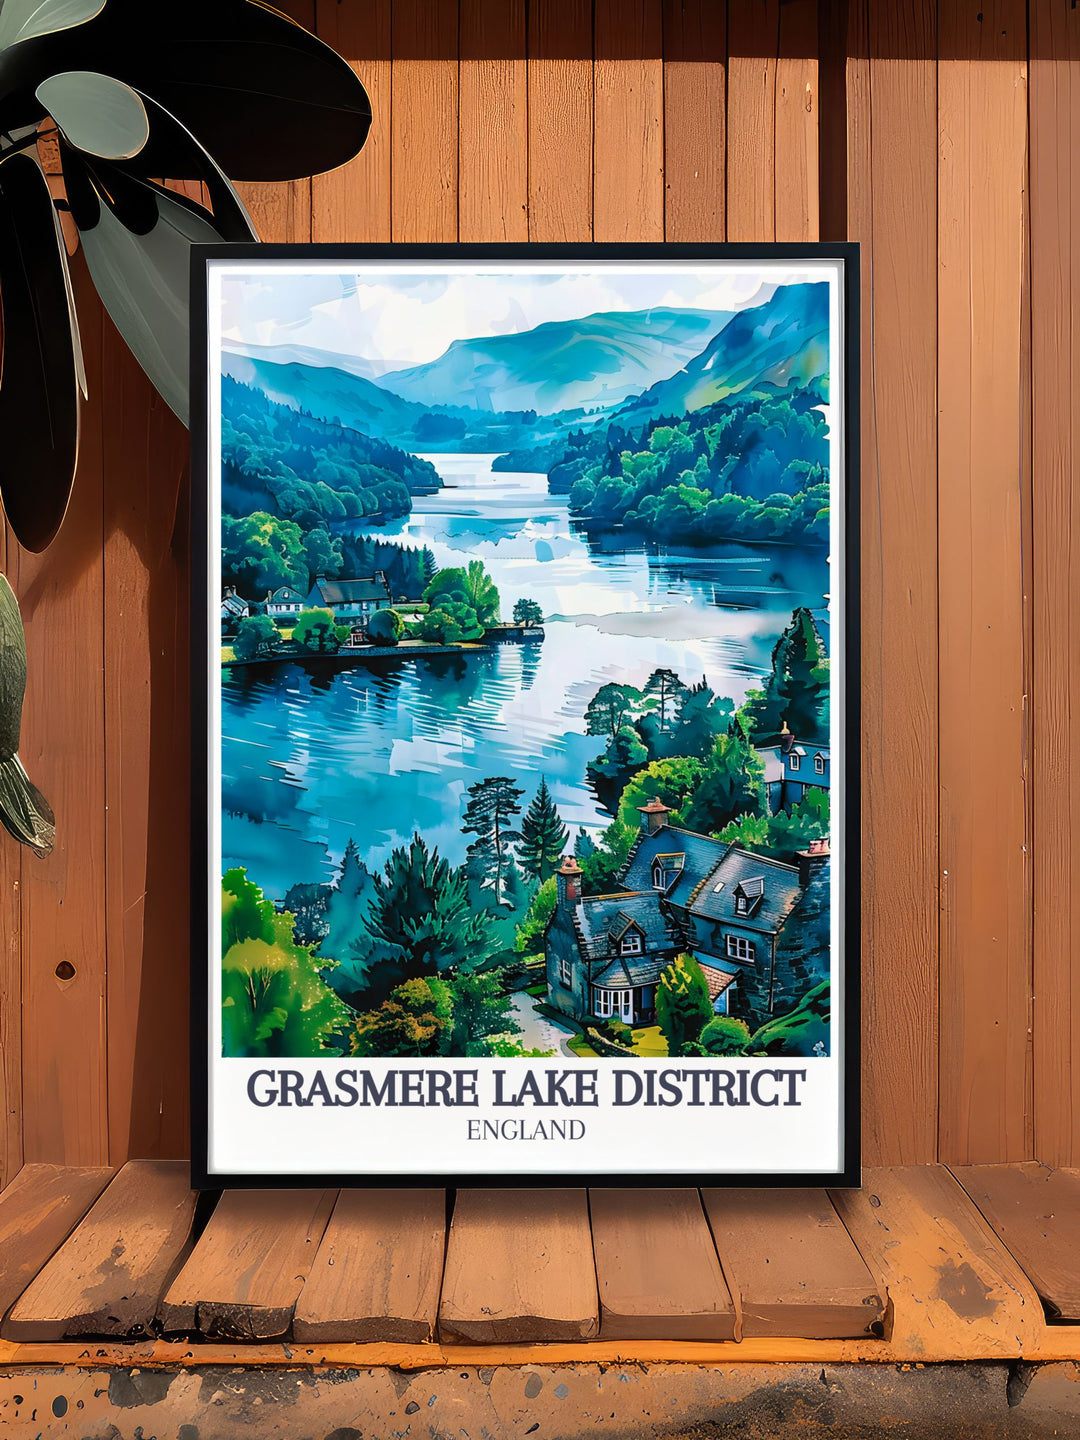 Showcasing Grasmere Lakes tranquil environment and the historic village, this travel poster offers a scenic representation of the Lake District, England, adding a touch of serenity to your home.